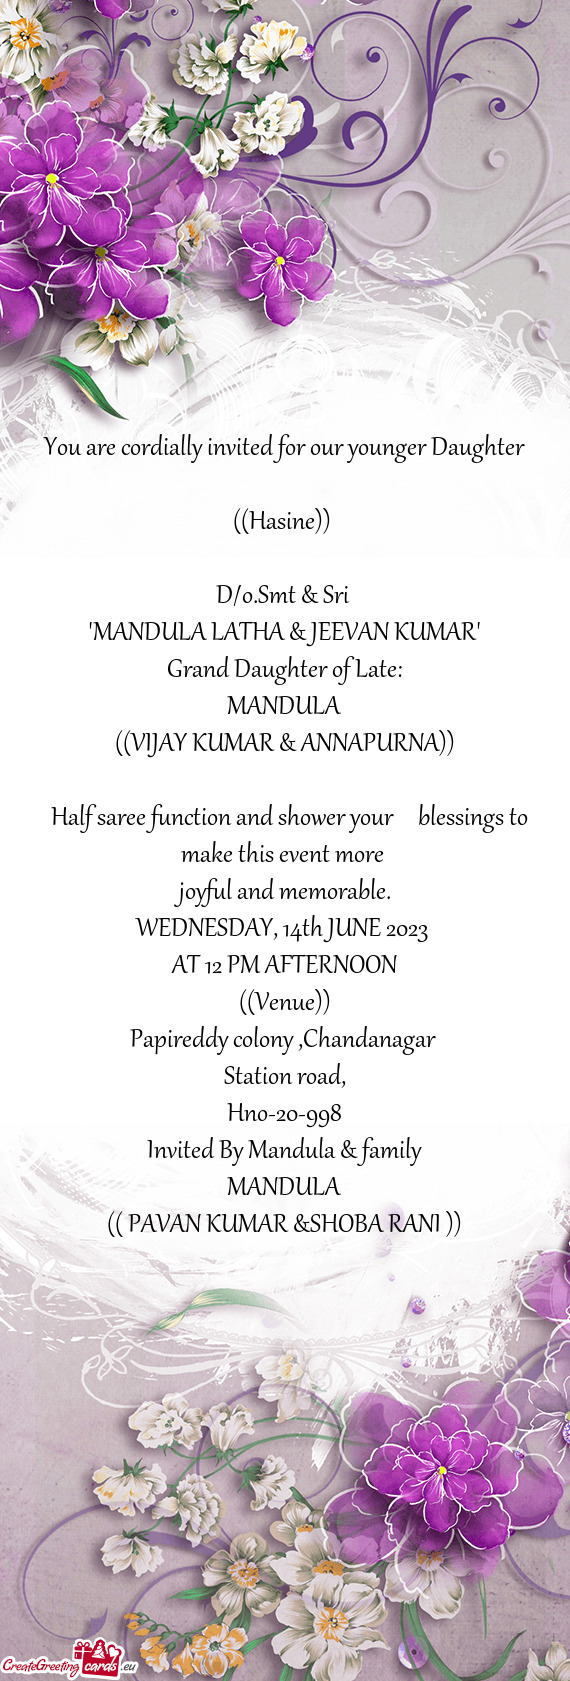 You are cordially invited for our younger Daughter